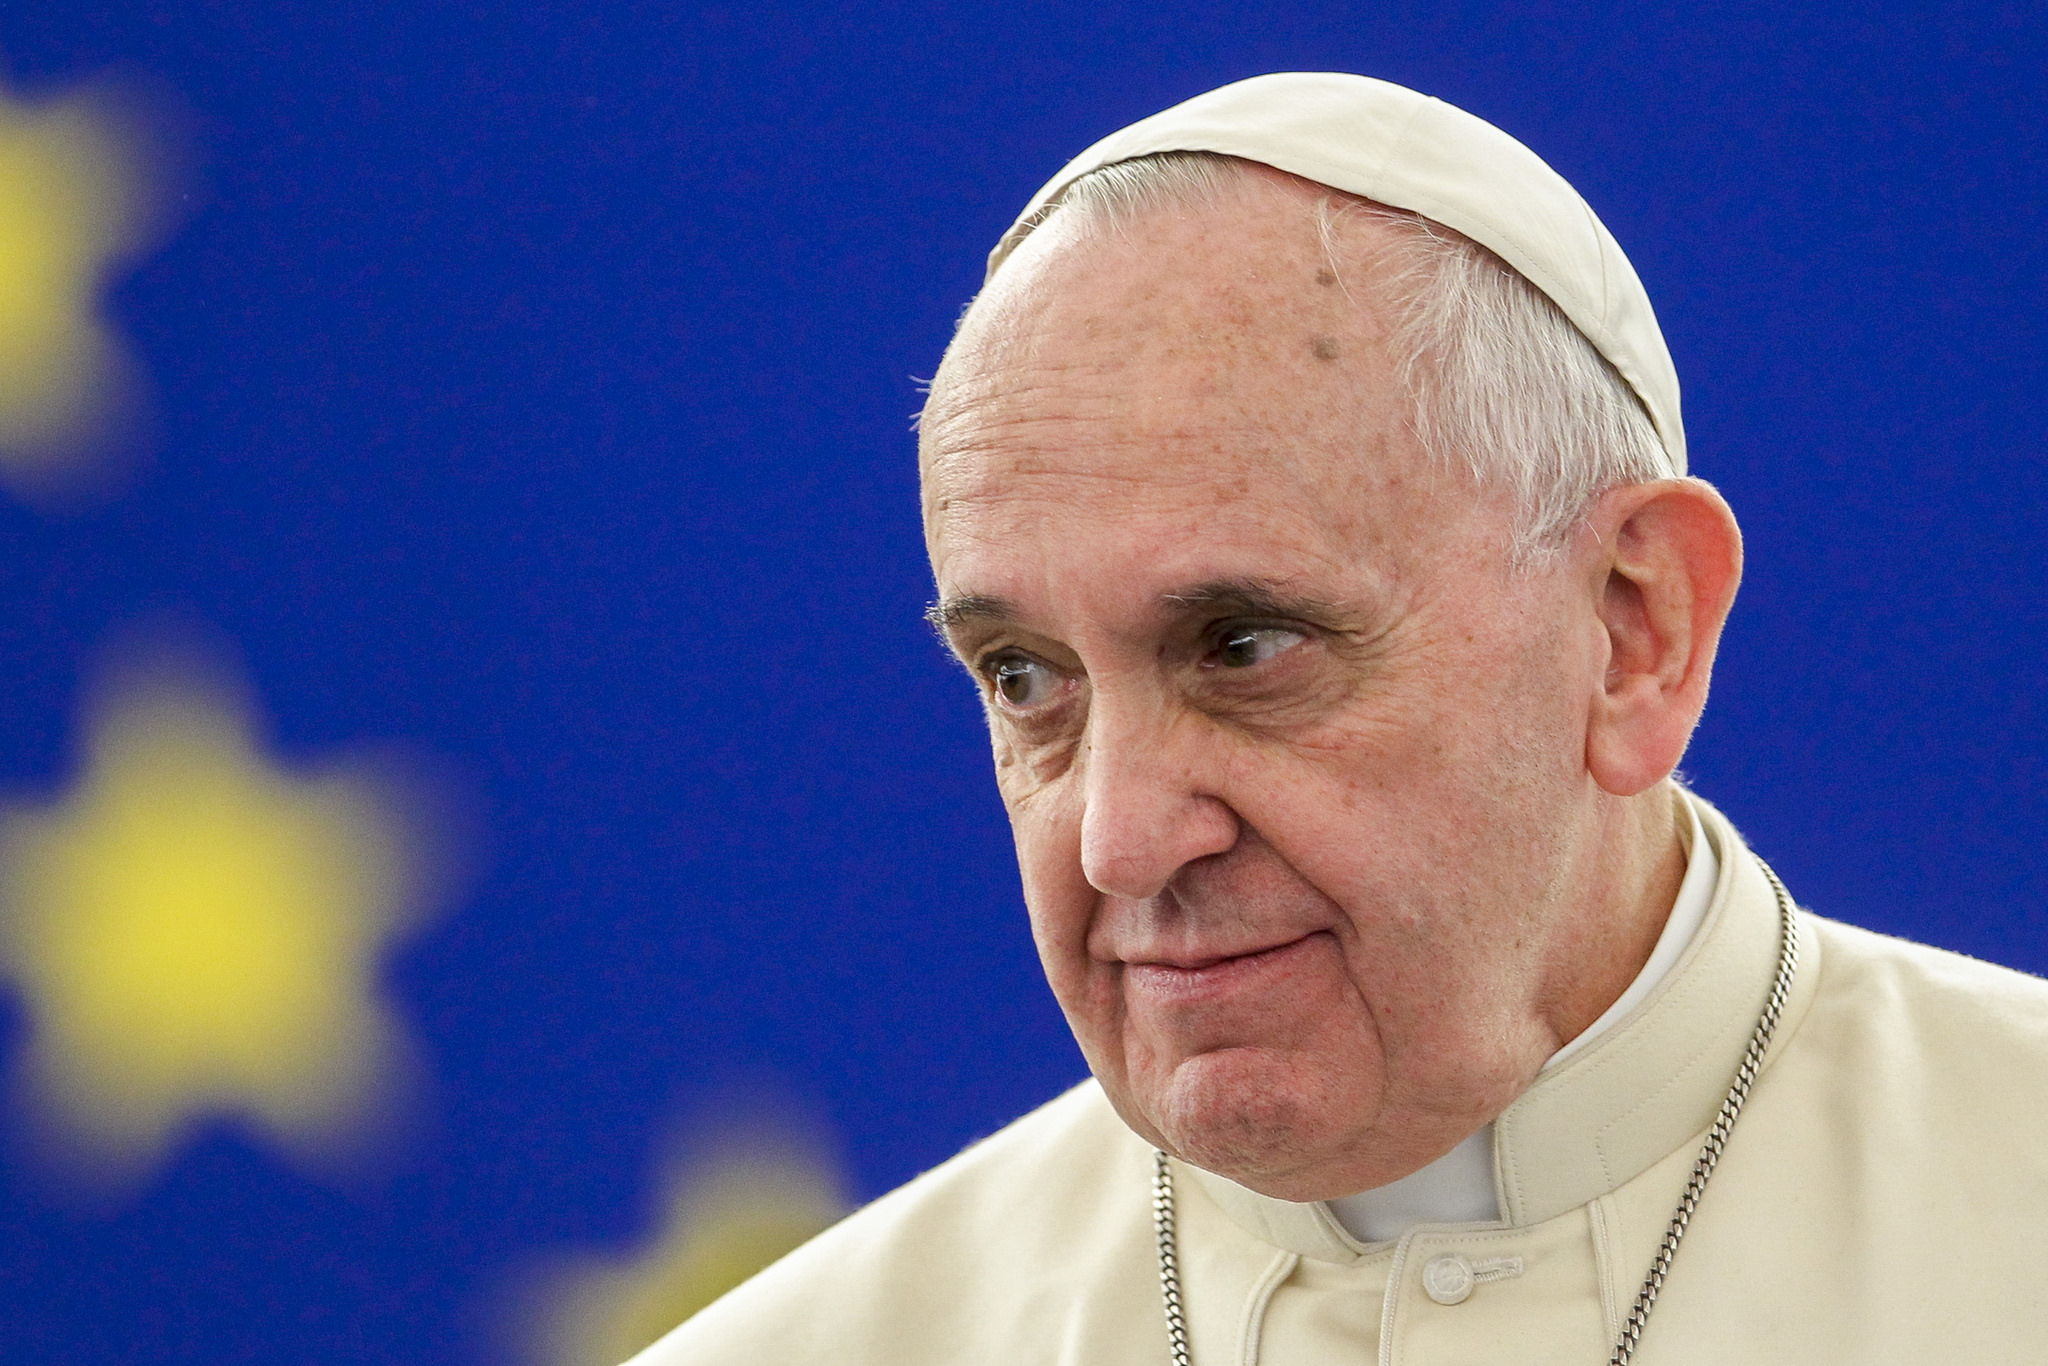 Hopes Mount That Pope Francis’ Visit Can Tone Down Anti-Immigrant Political Rhetoric